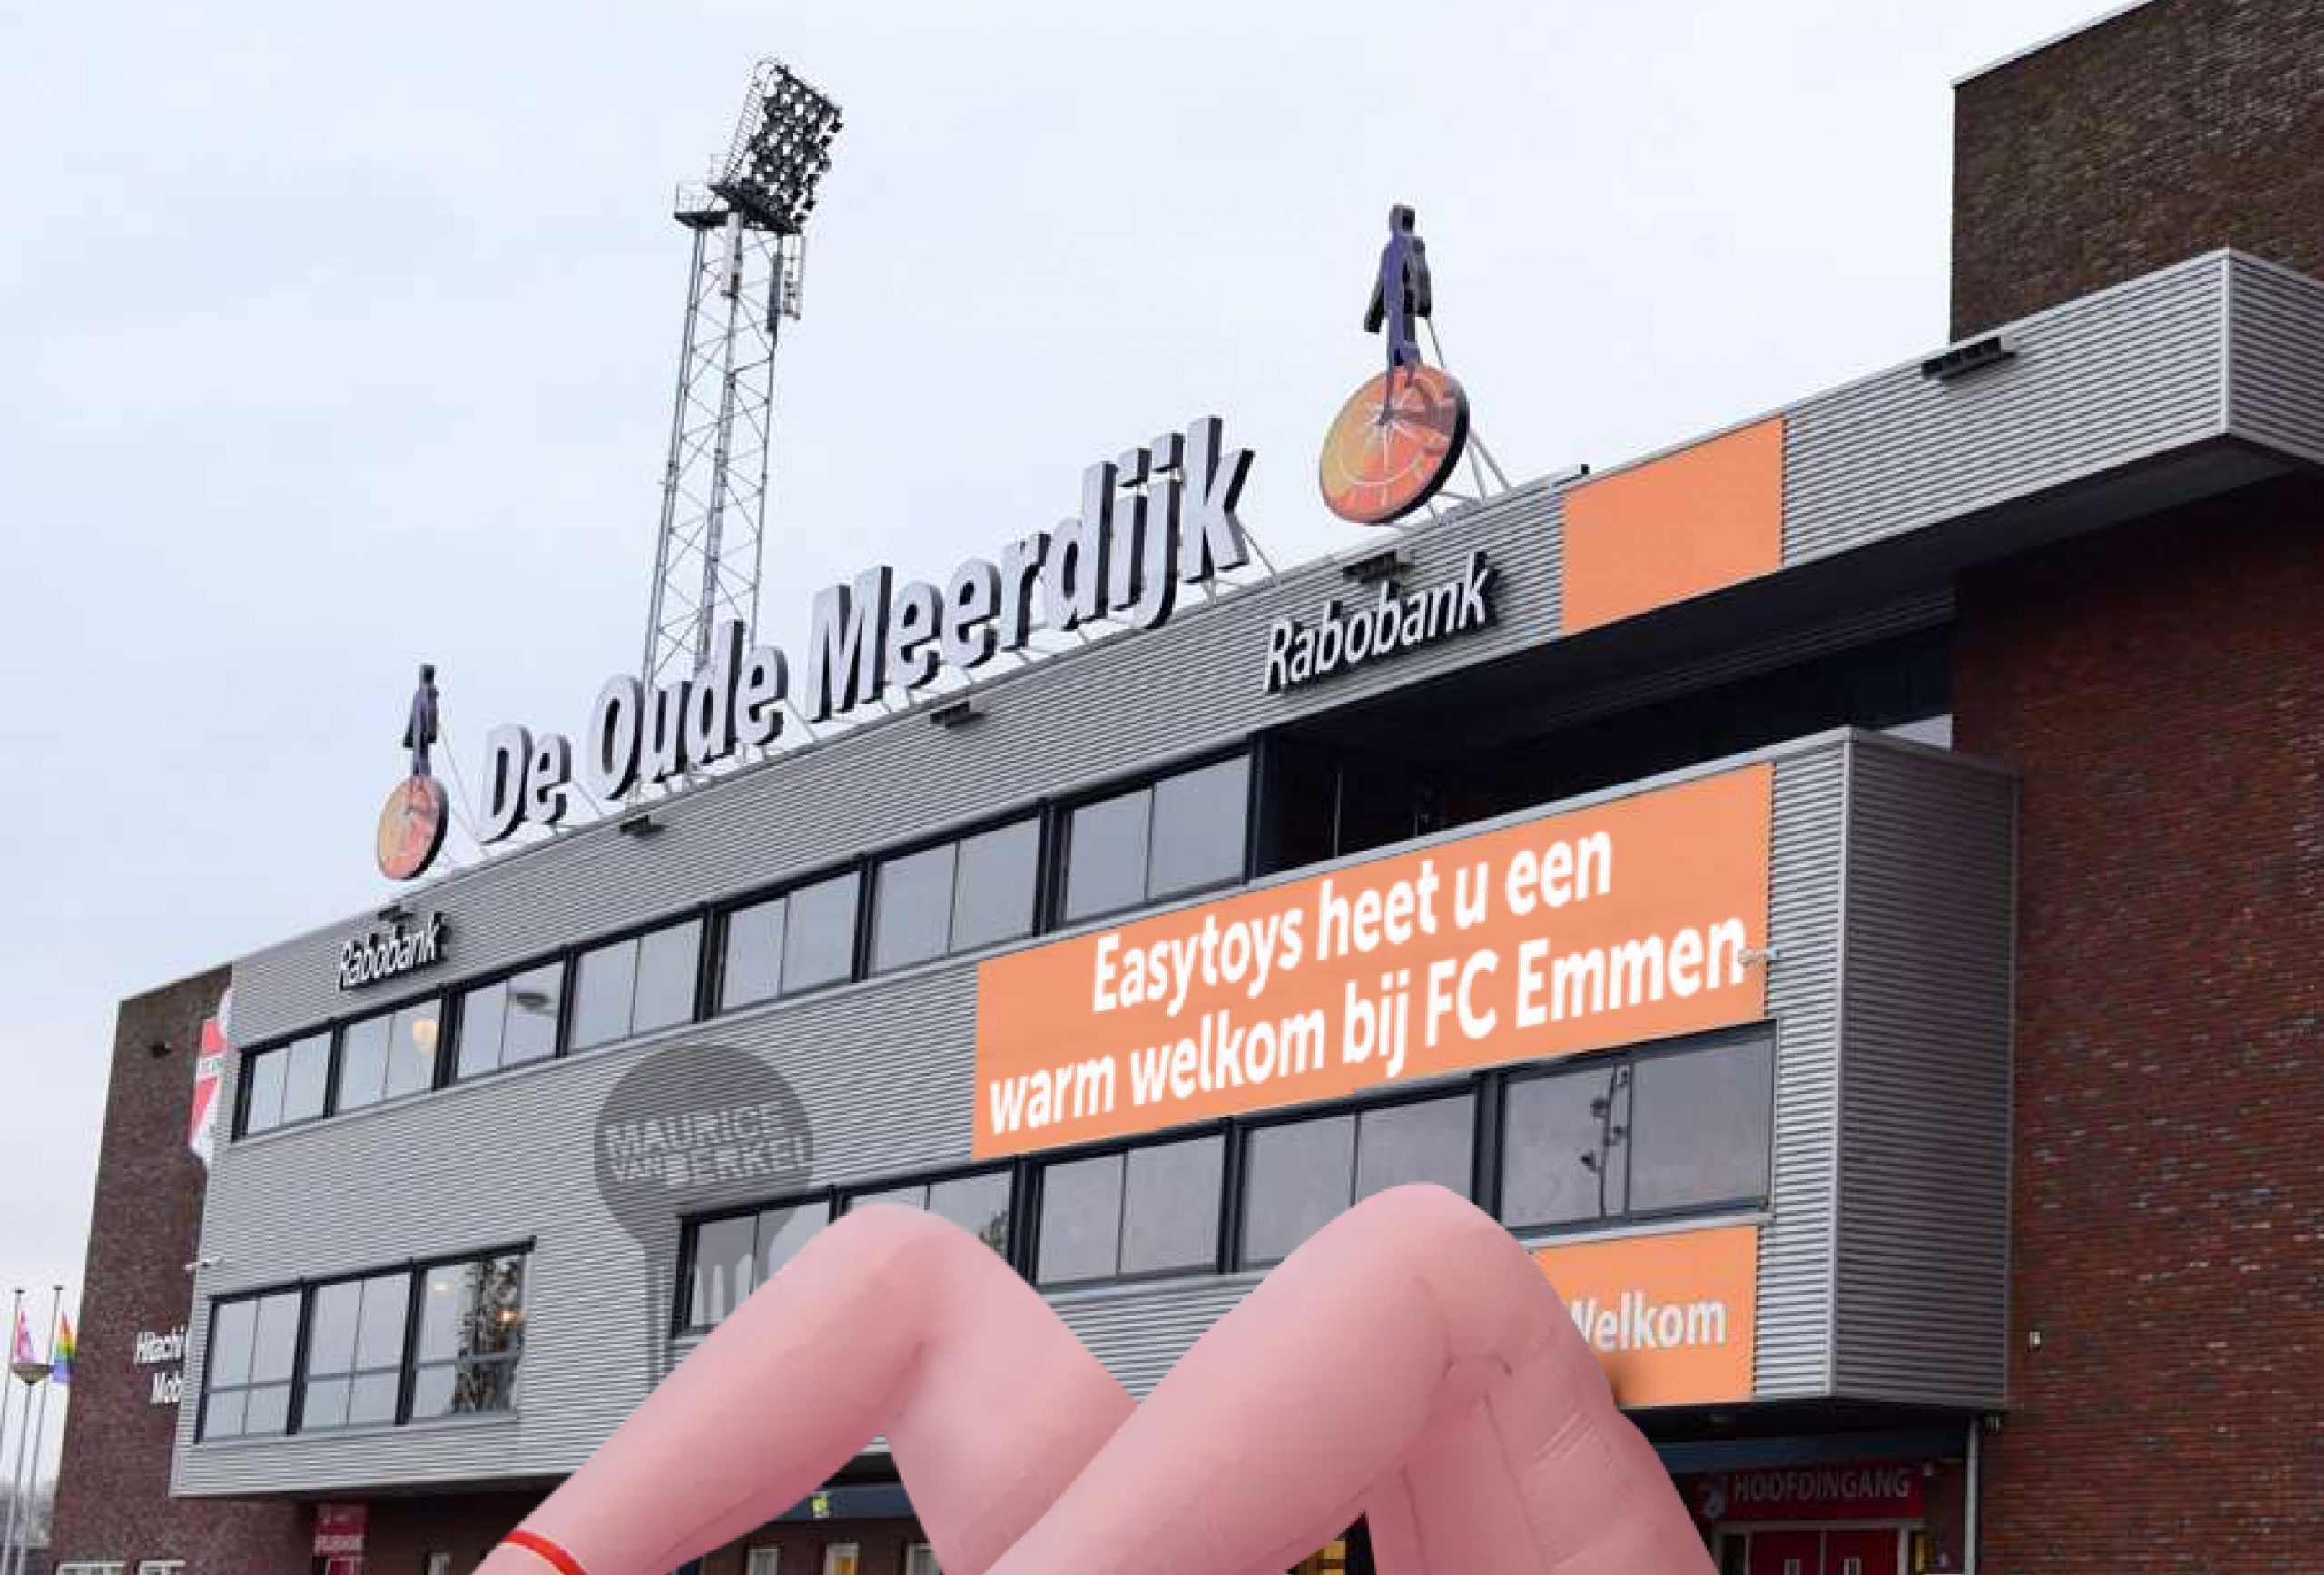 Photo – New sponsors EasyToys arrange for an x-rated welcome for FC Emmen fans